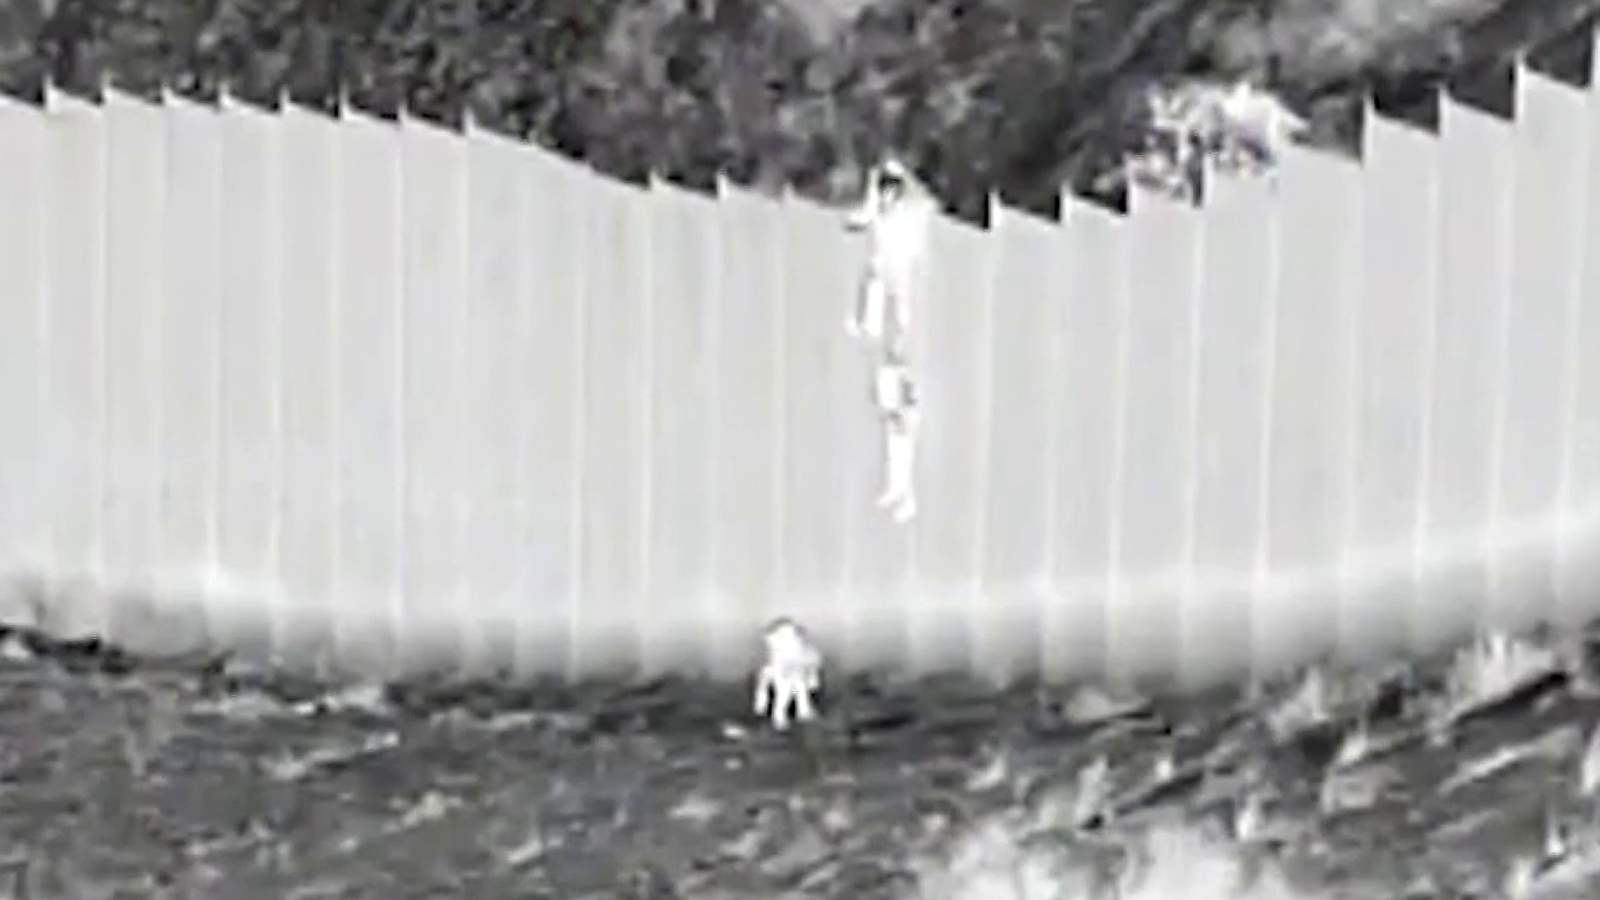 Authorities: Smugglers drop children, ages 3 and 5, over US border wall